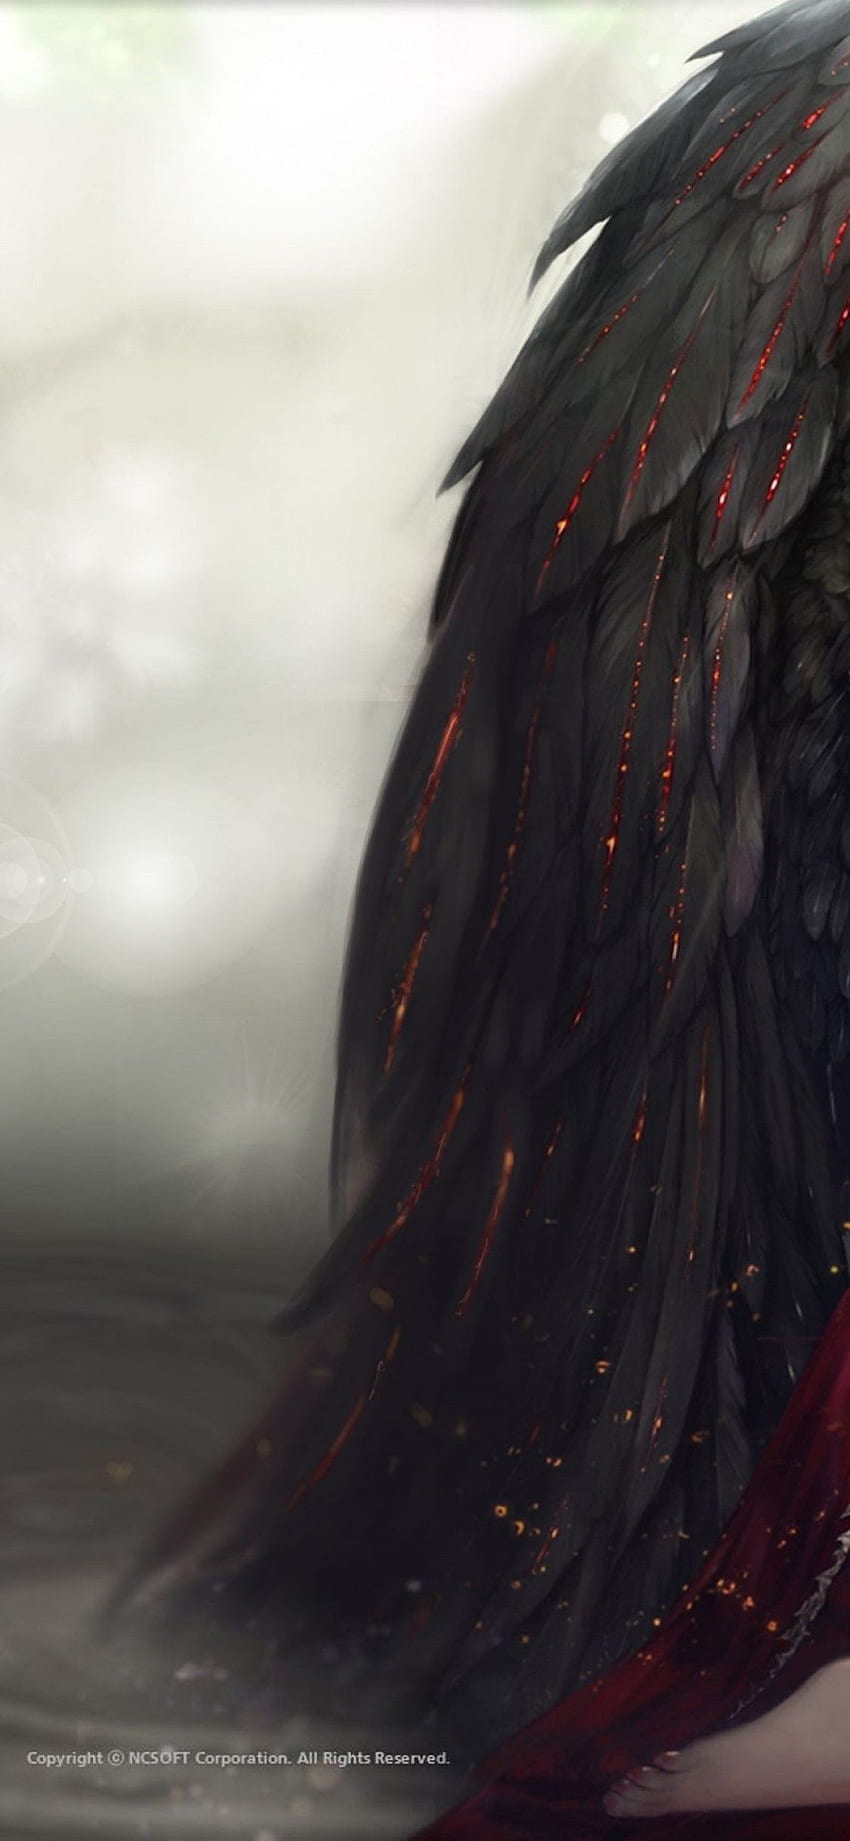 Aion Online, Fallen Angel, Dark Wings, Red Dress, Red Eyes for iPhone 11 Pro & X HD phone wallpaper